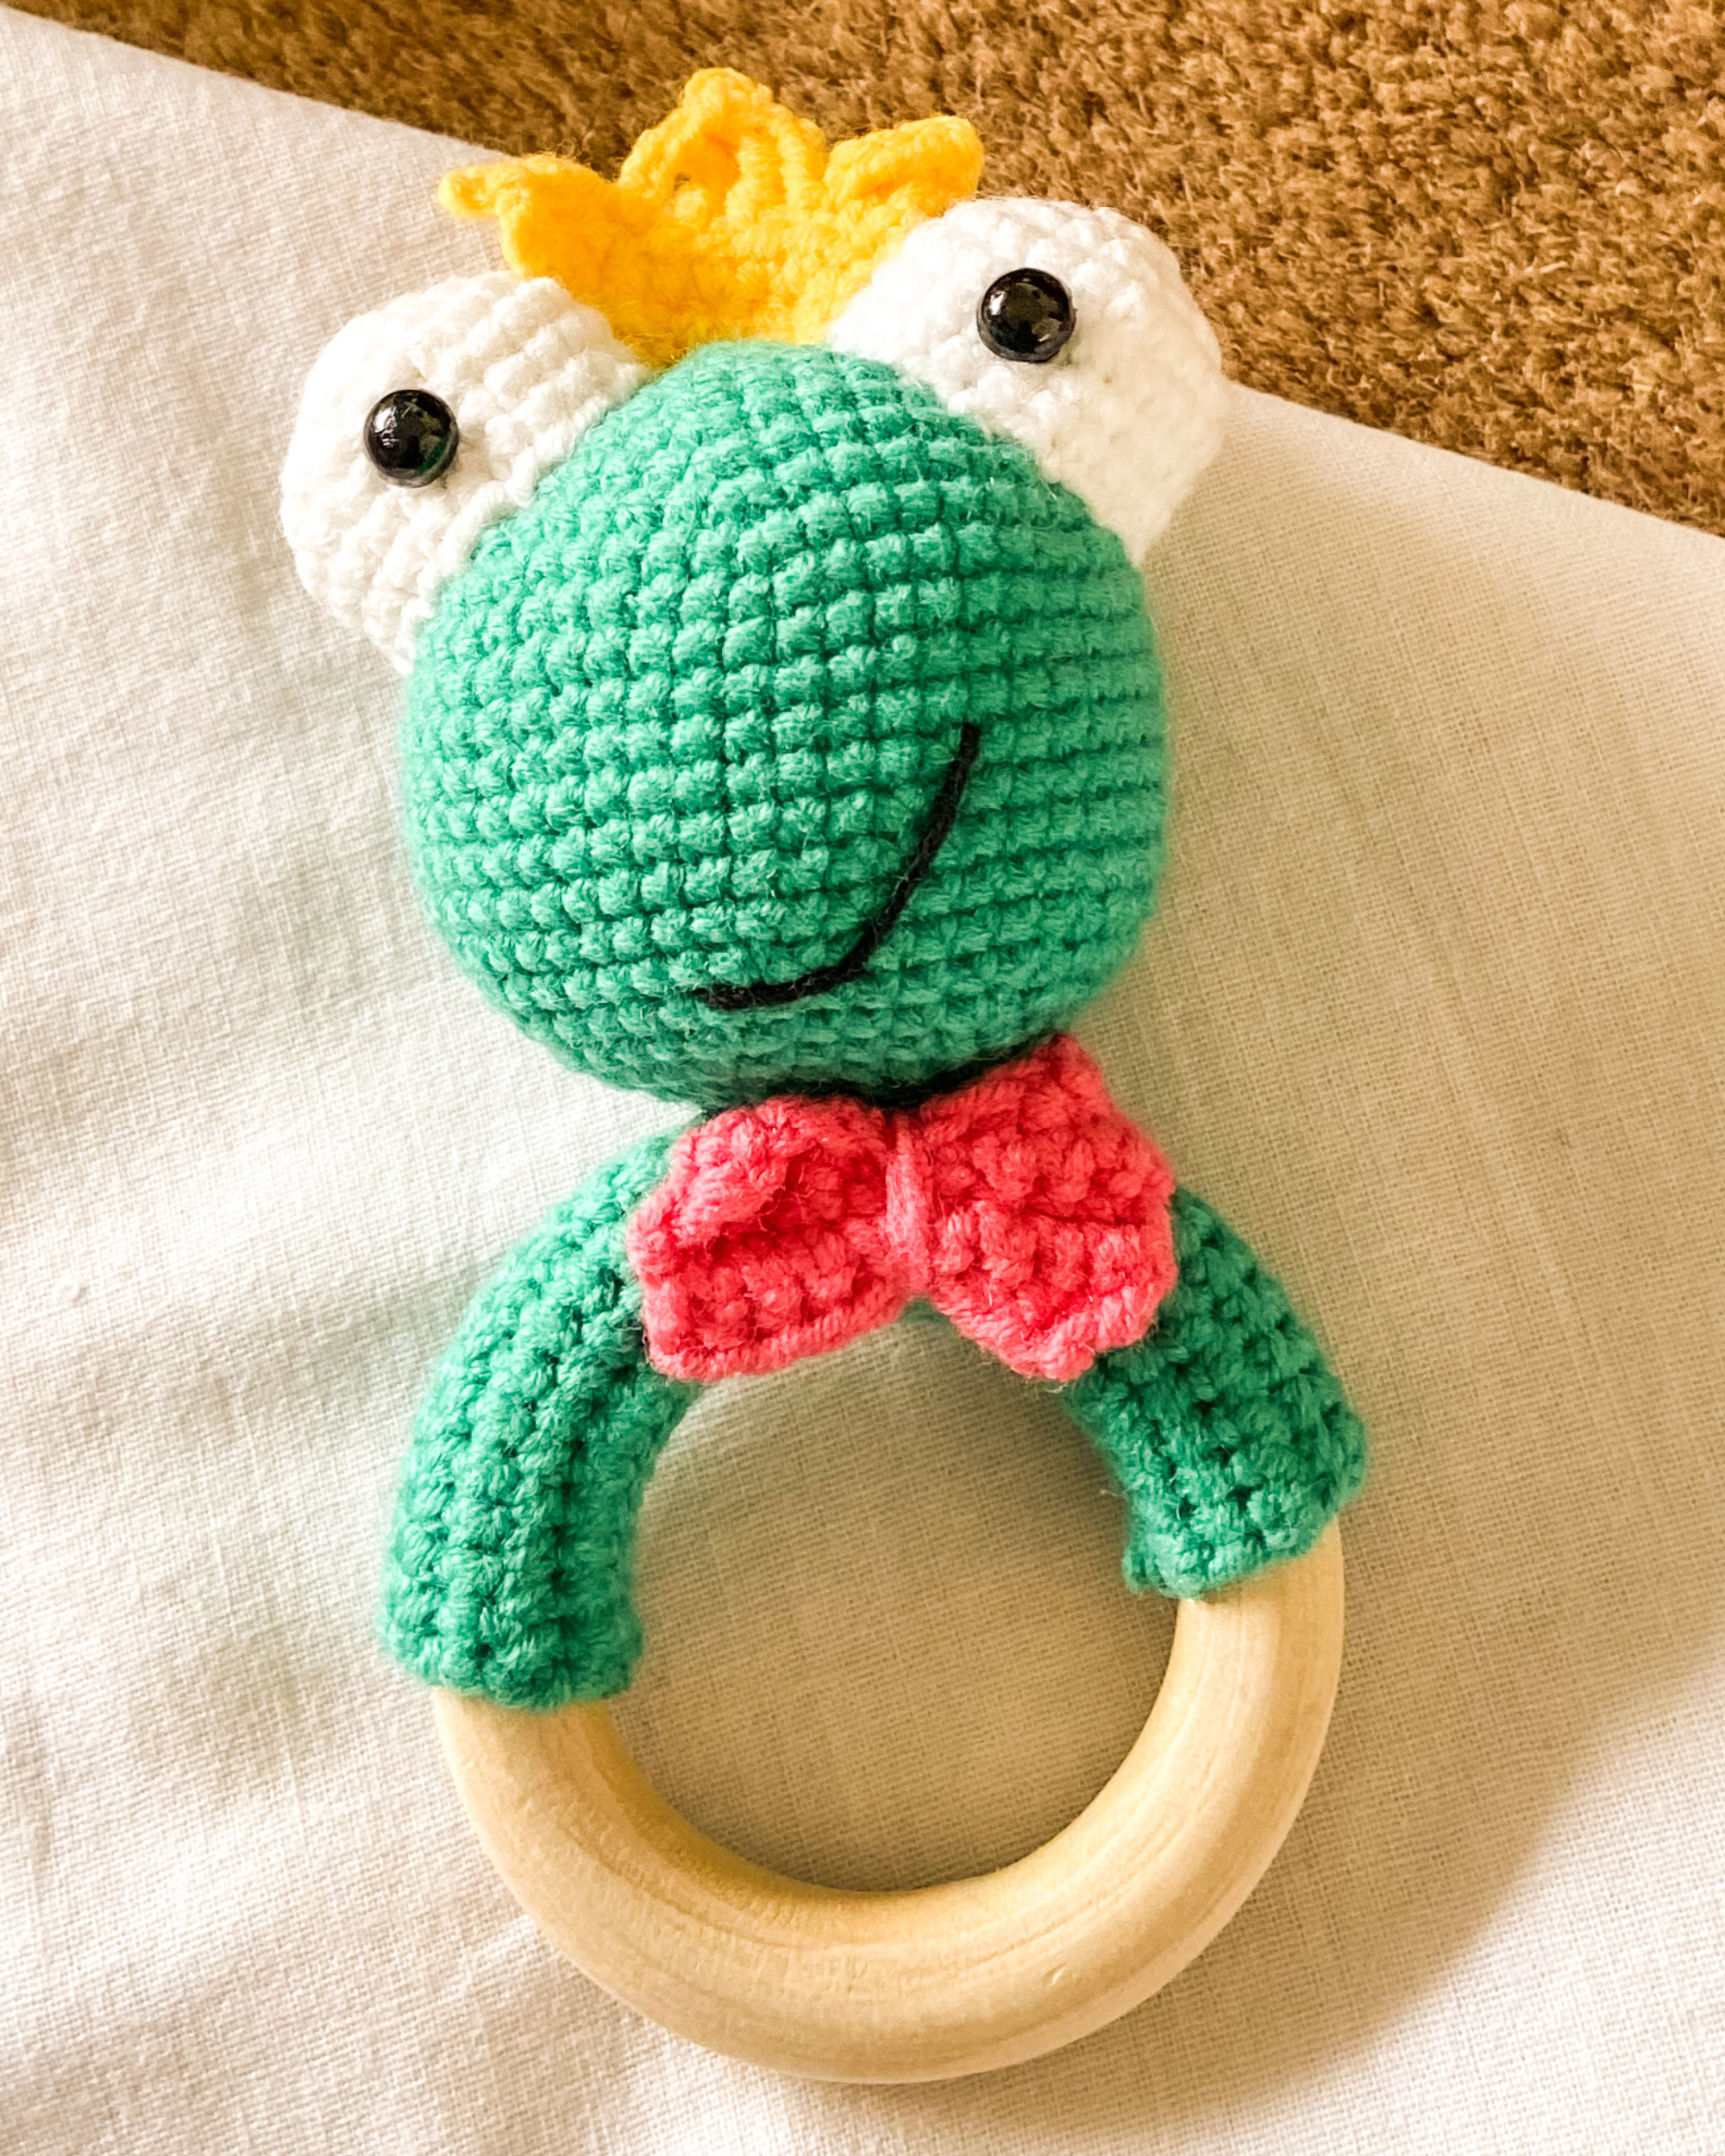 Hand crocheted baby sound rattle - frog